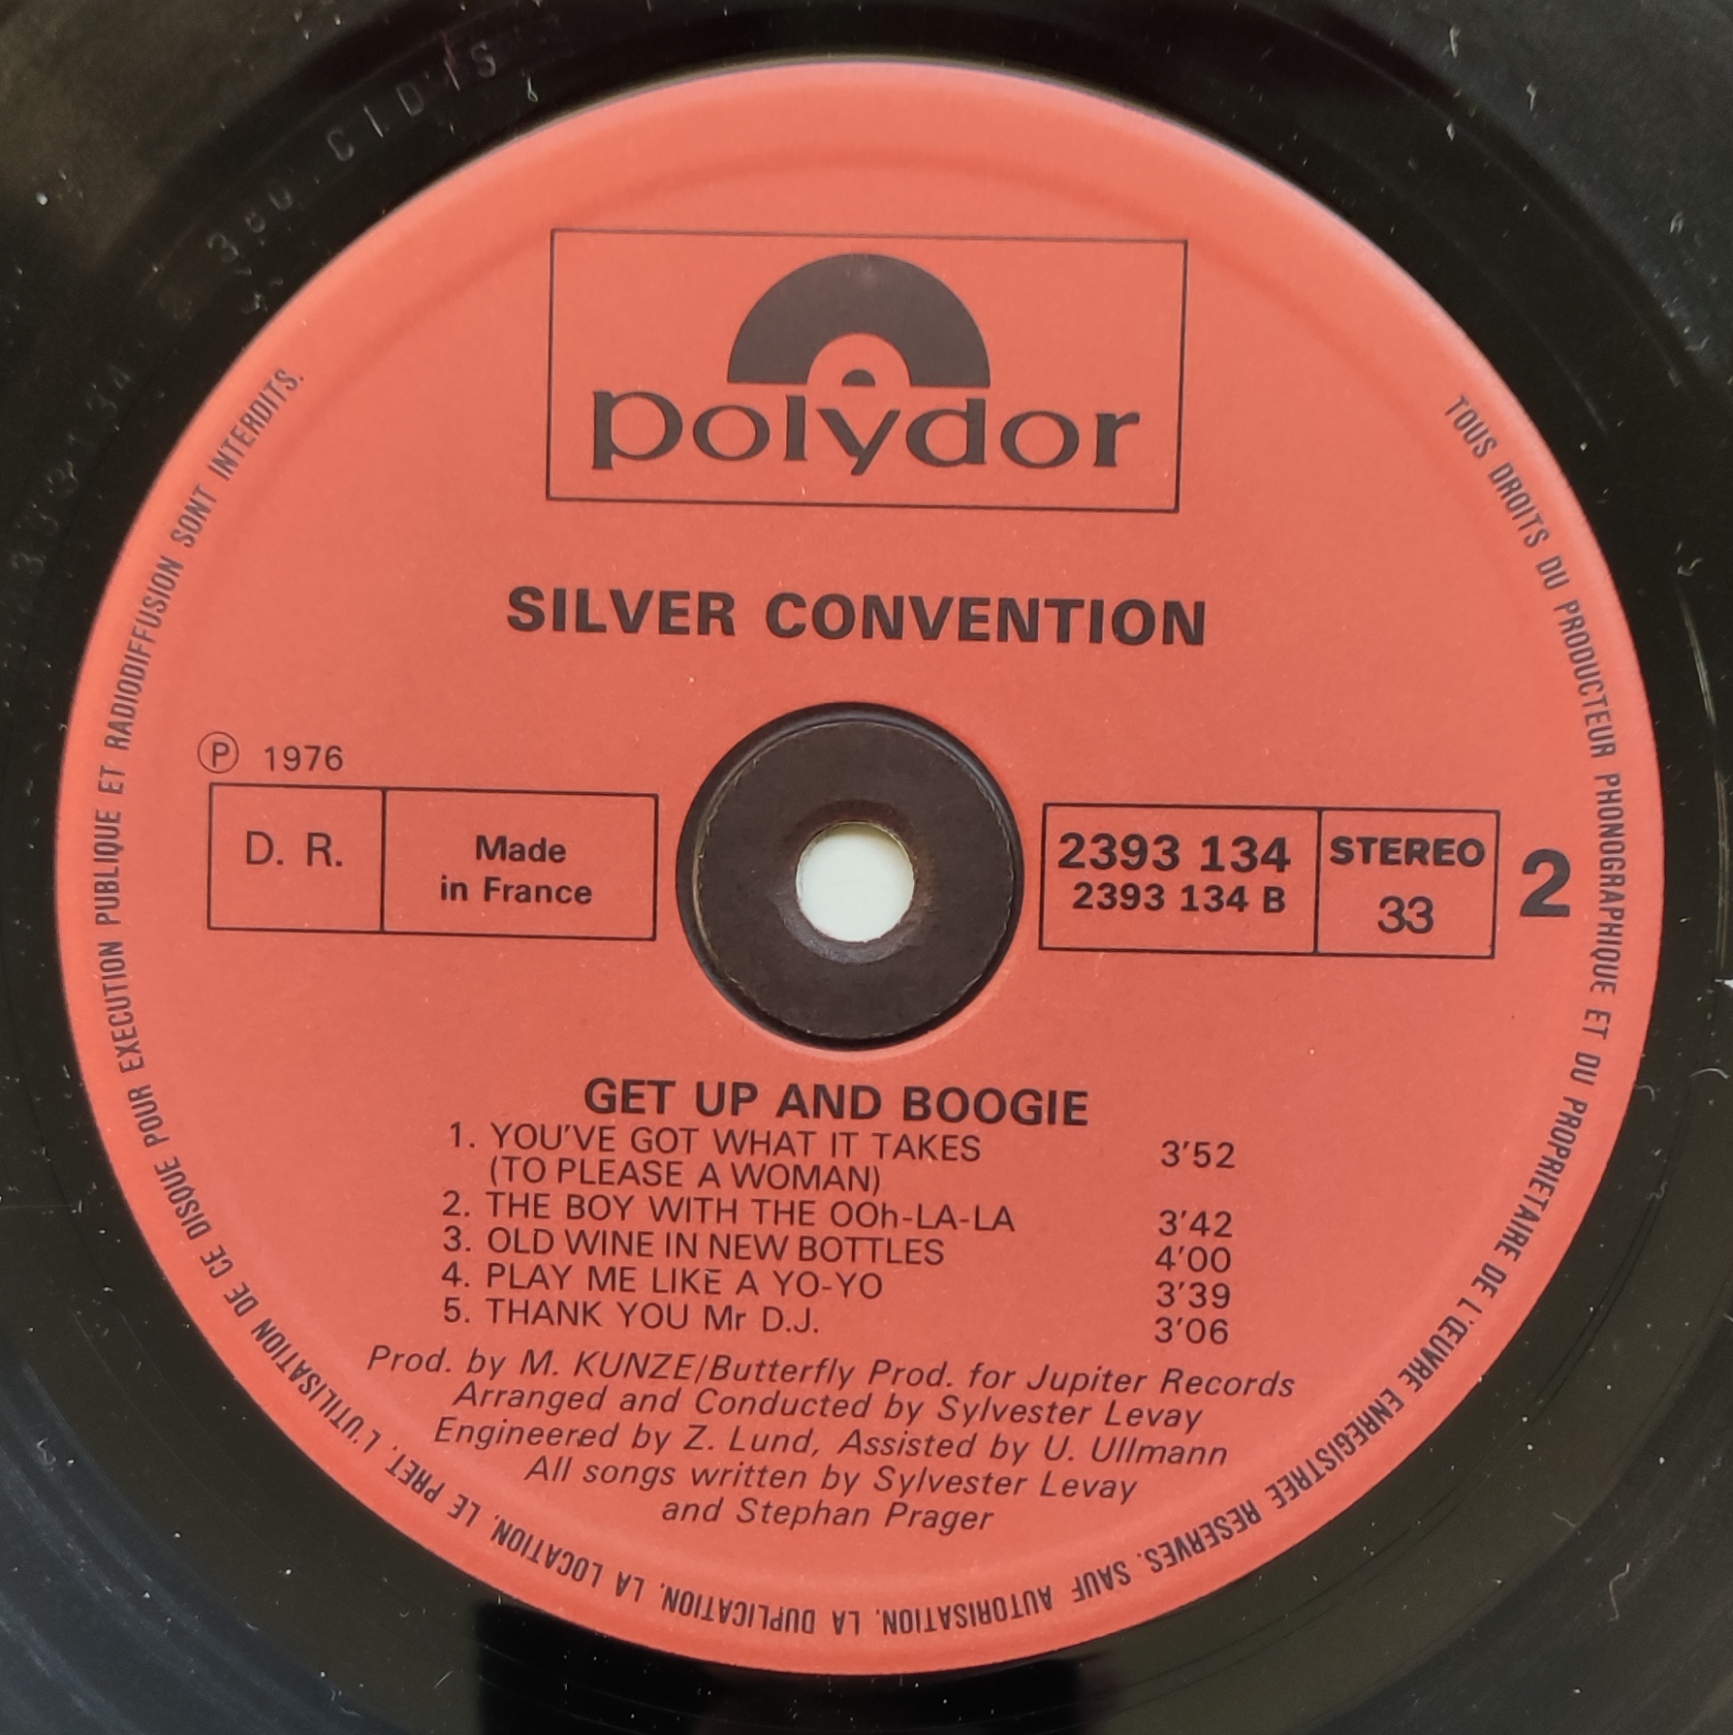 CONVENTION - Get up and boogie - 1976 - France - Polydor - -33 Tours OriginVinylStore -